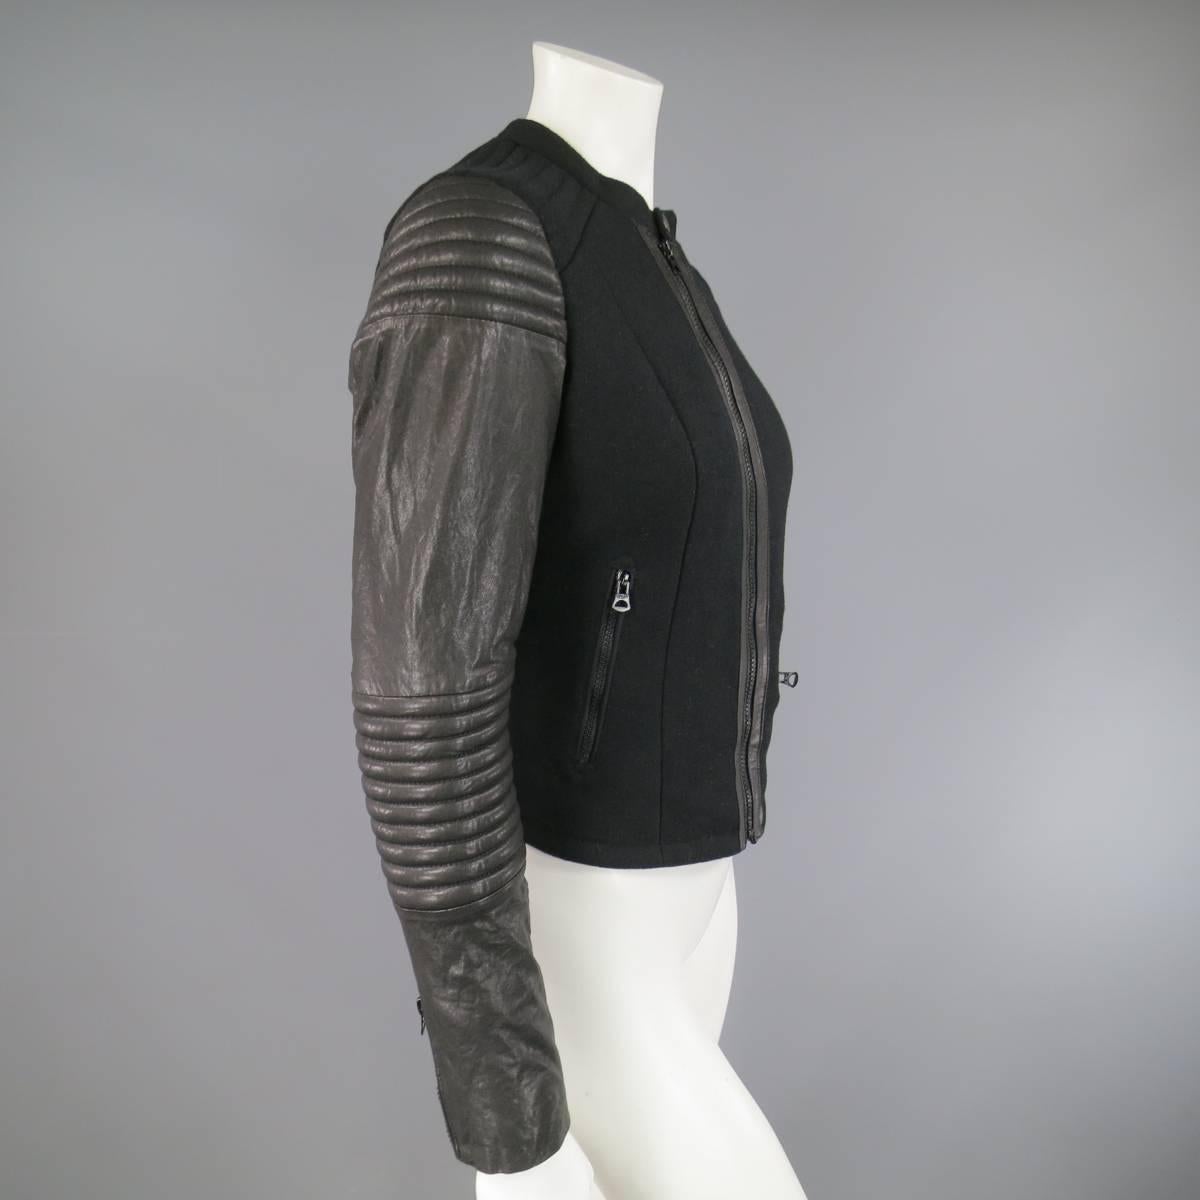 PAUL SMITH Jacket - Size L Black Quilted Wool Leather Sleeve Biker Moto 2